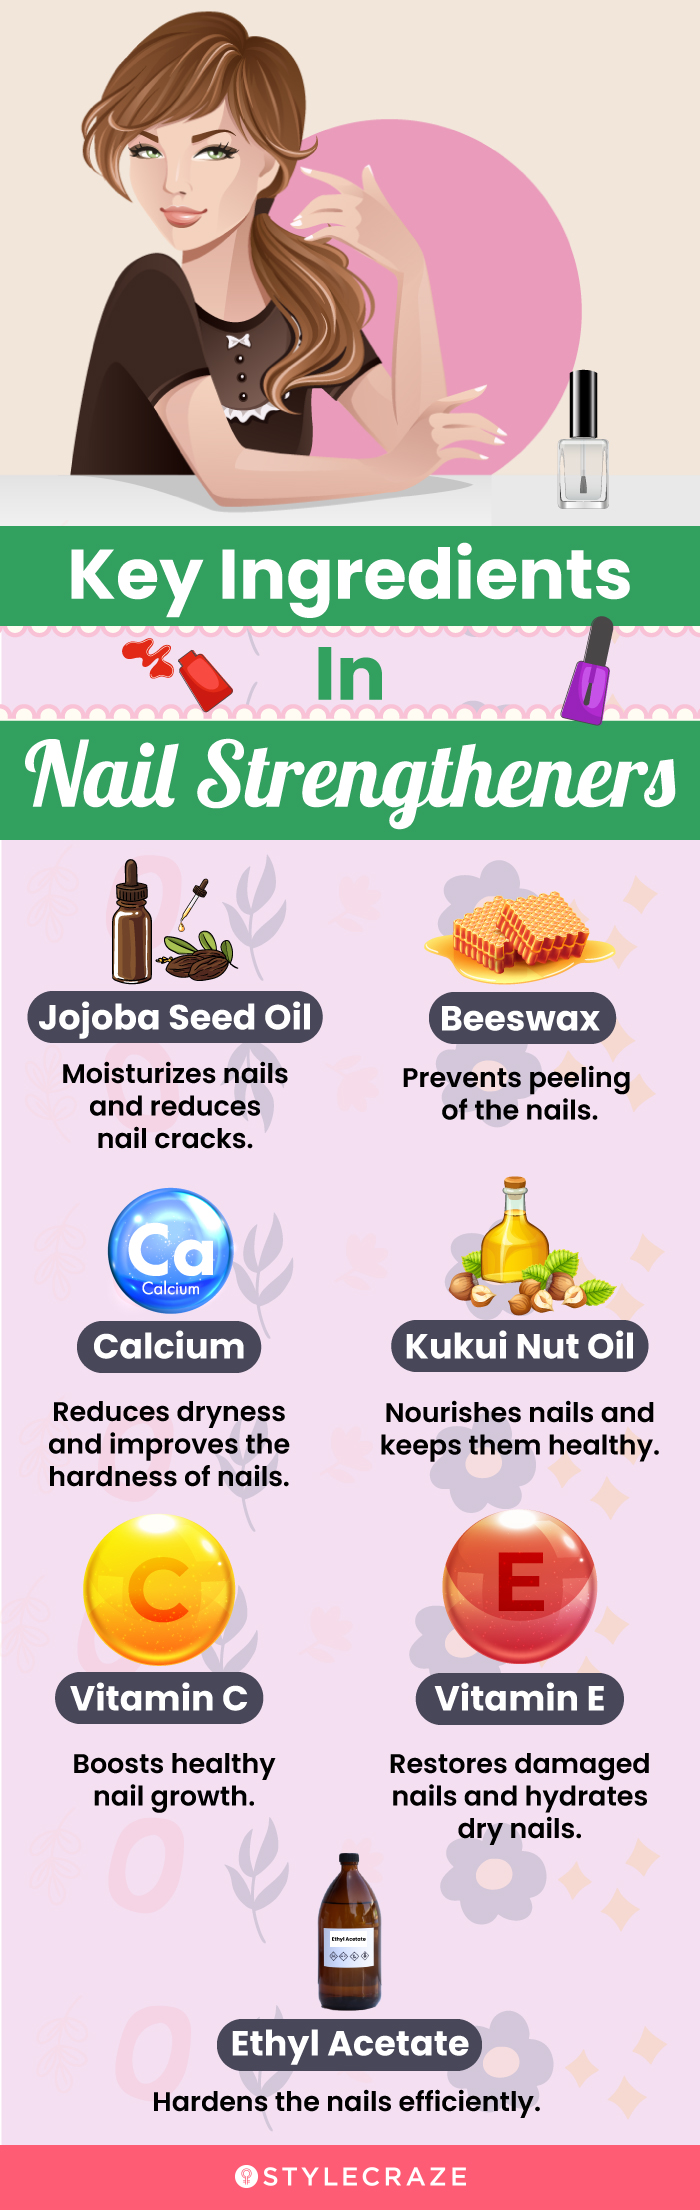 Key Ingredients In Nail Strengtheners (infographic)